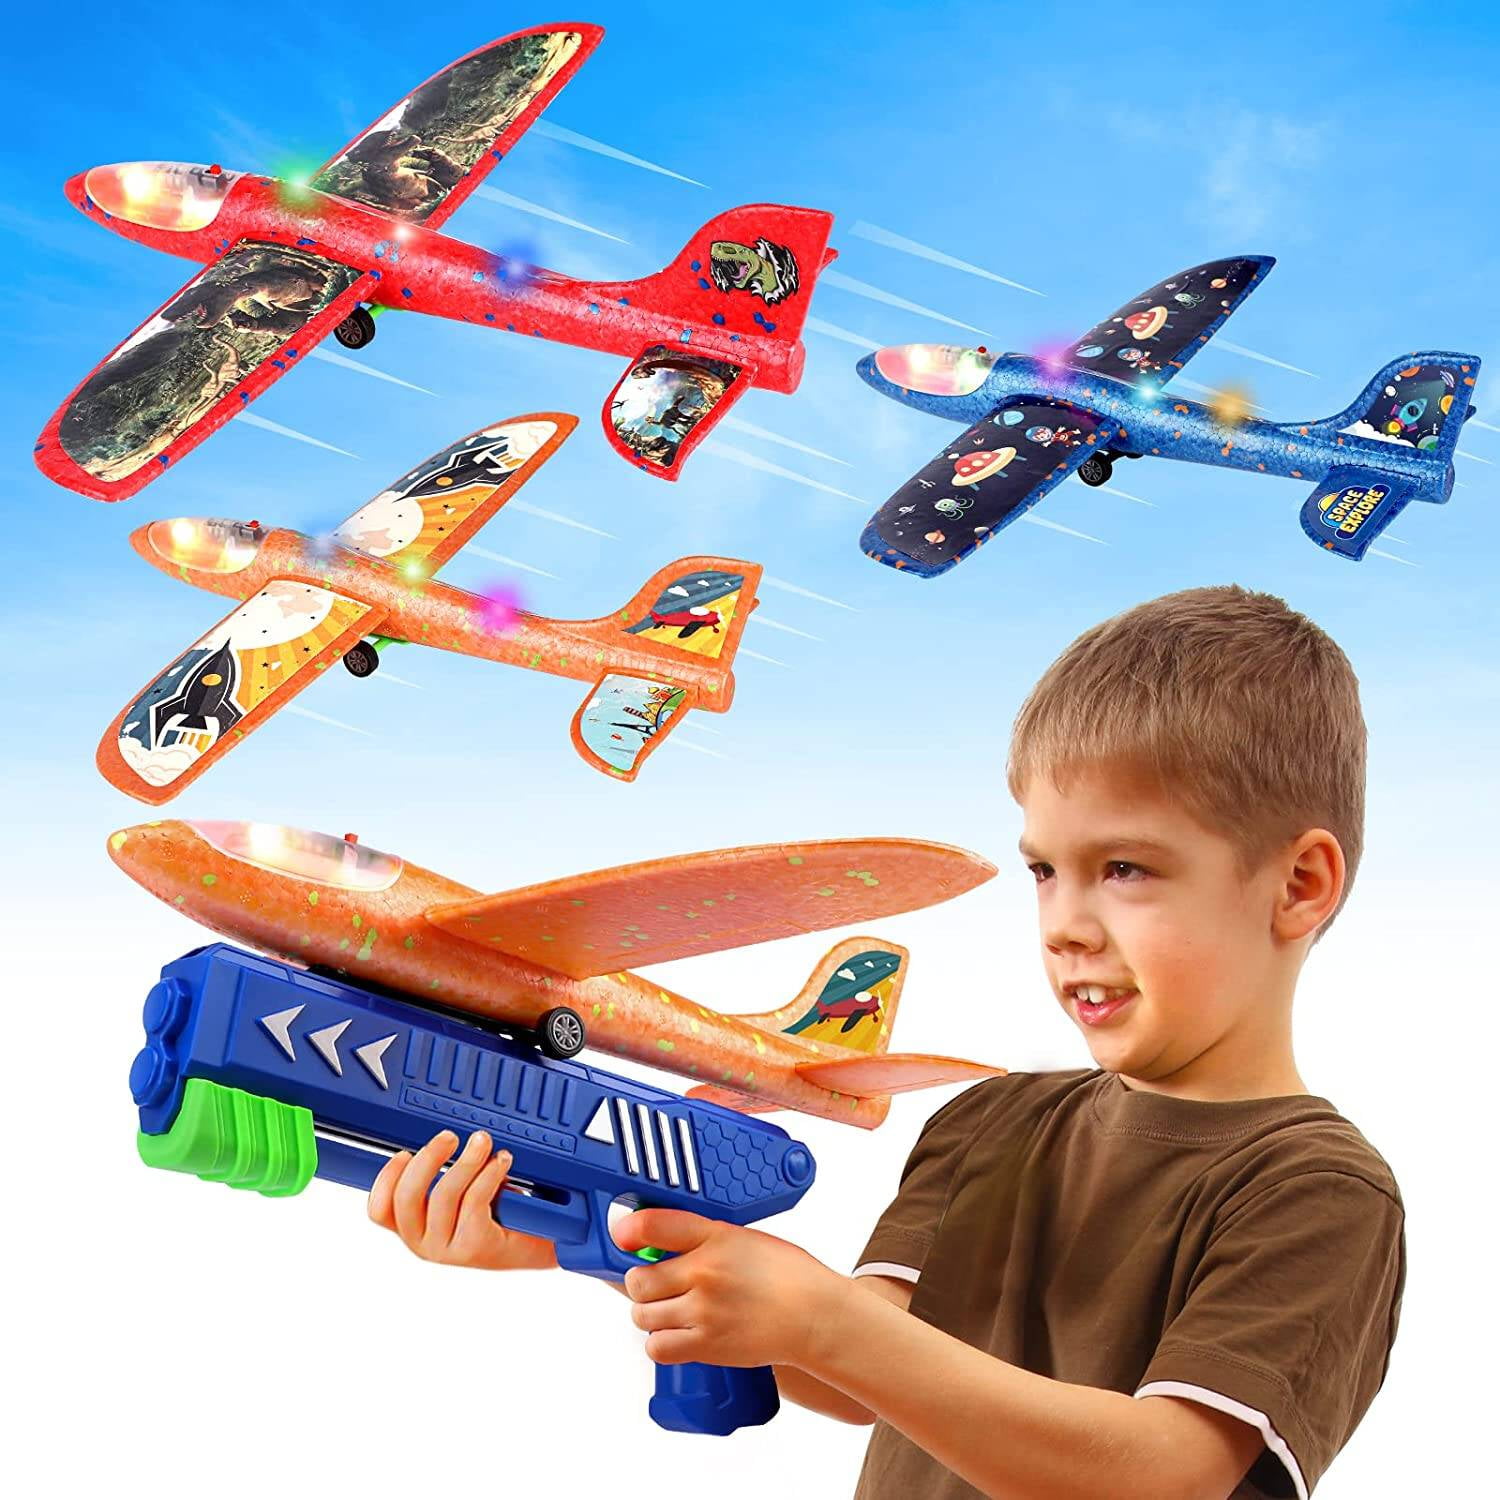 Aiencsai 3 Pack Airplane Launcher Toy, 12.6 Foam Glider LED Plane, 2 Flight Mode Catapult Plane for Kids Outdoor Sport Flying Toys Gifts for 4 5 6 7